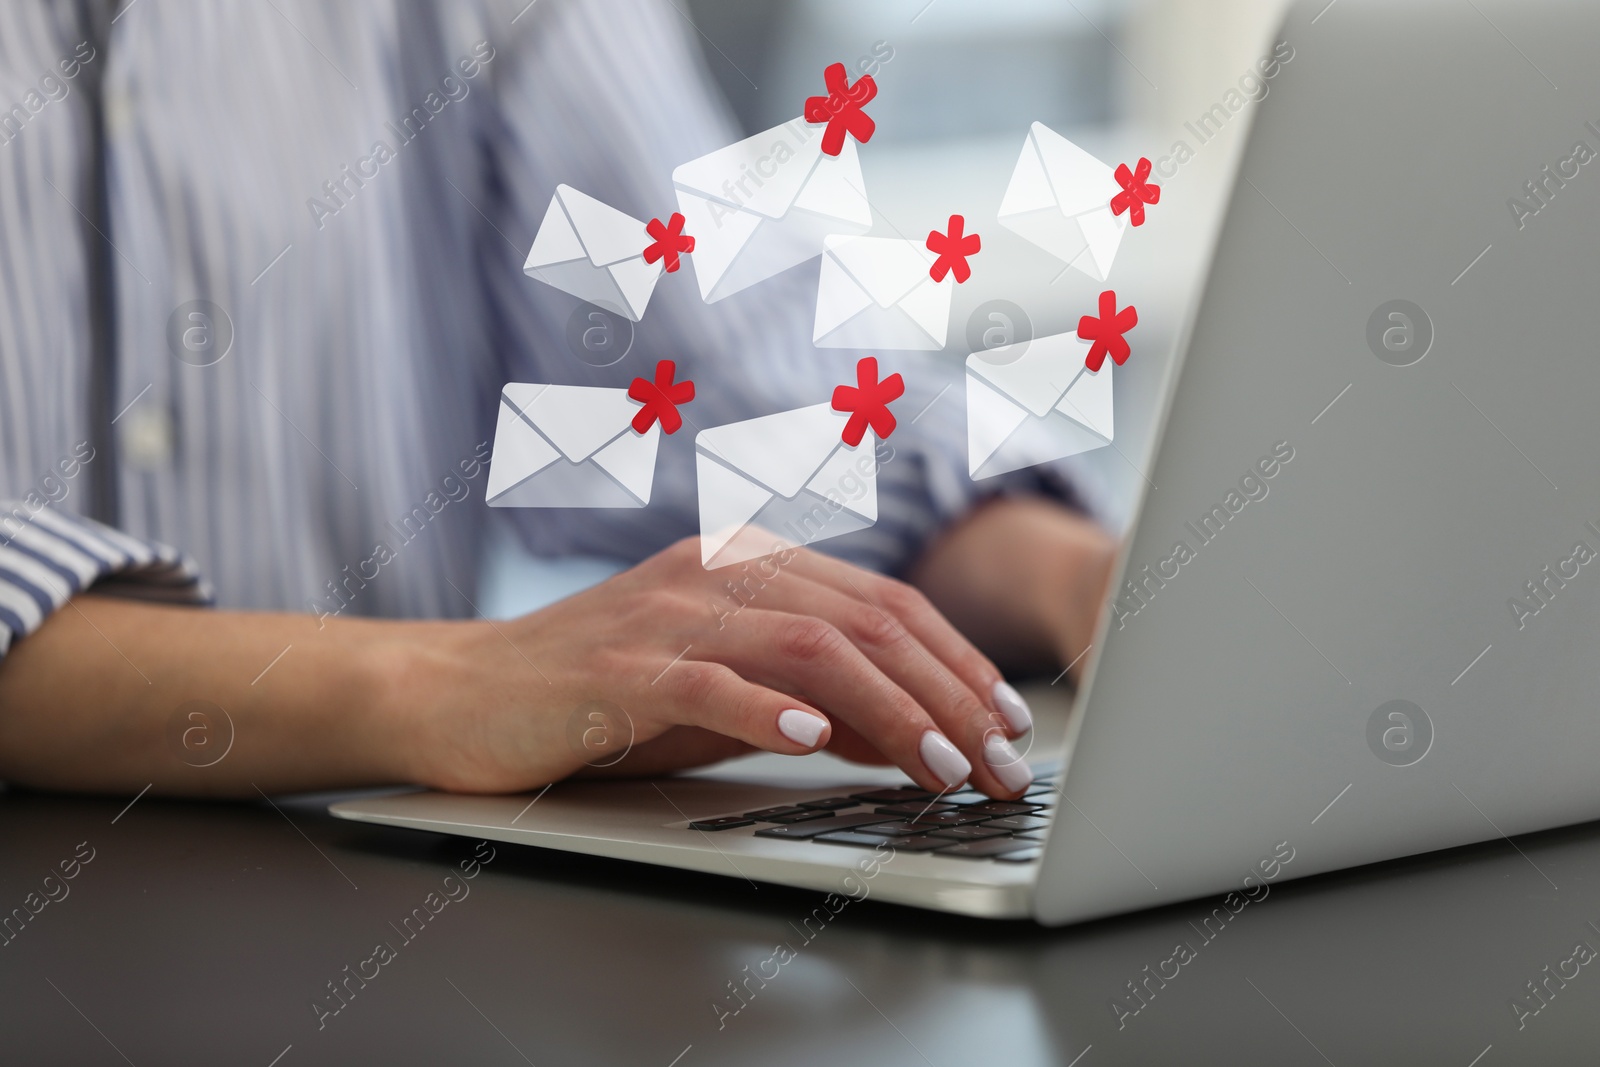 Image of Woman using laptop at table, closeup. Spam message notifications above device, illustration